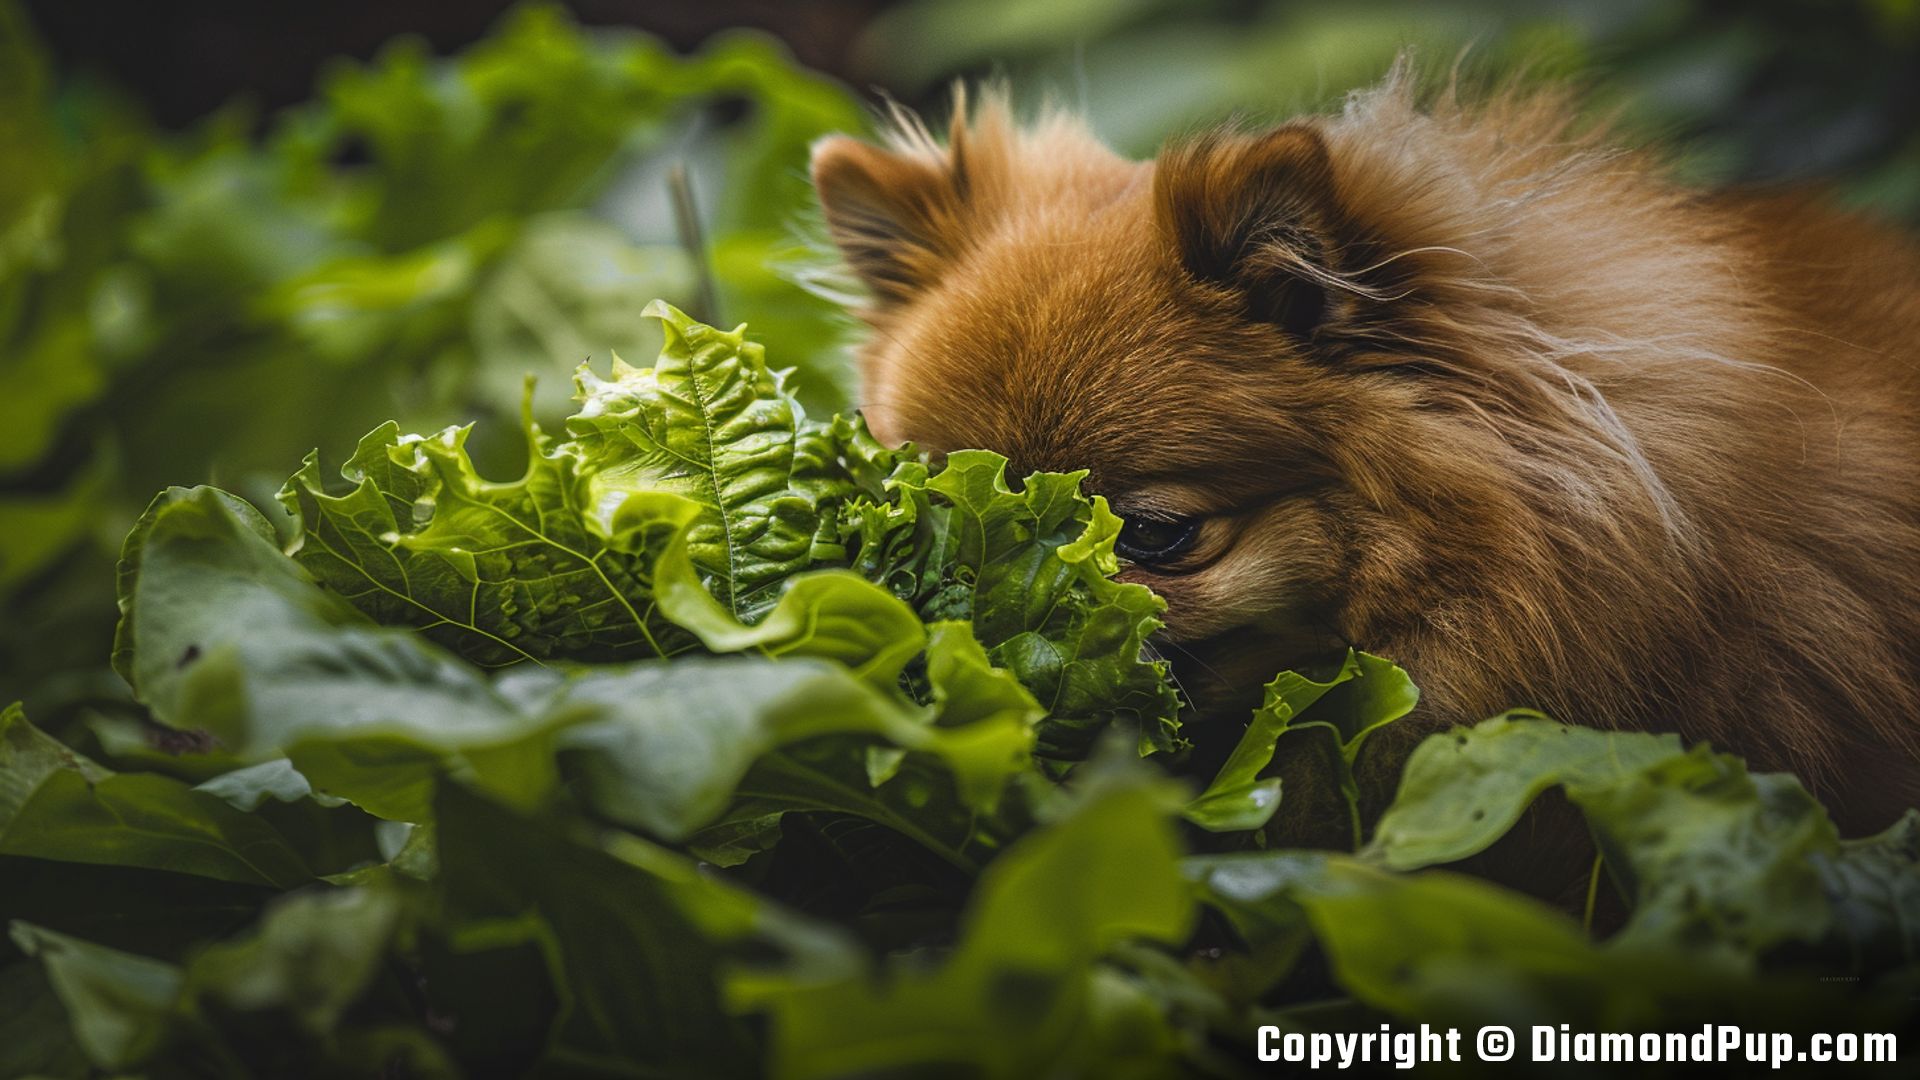 Photograph of a Cute Pomeranian Snacking on Lettuce